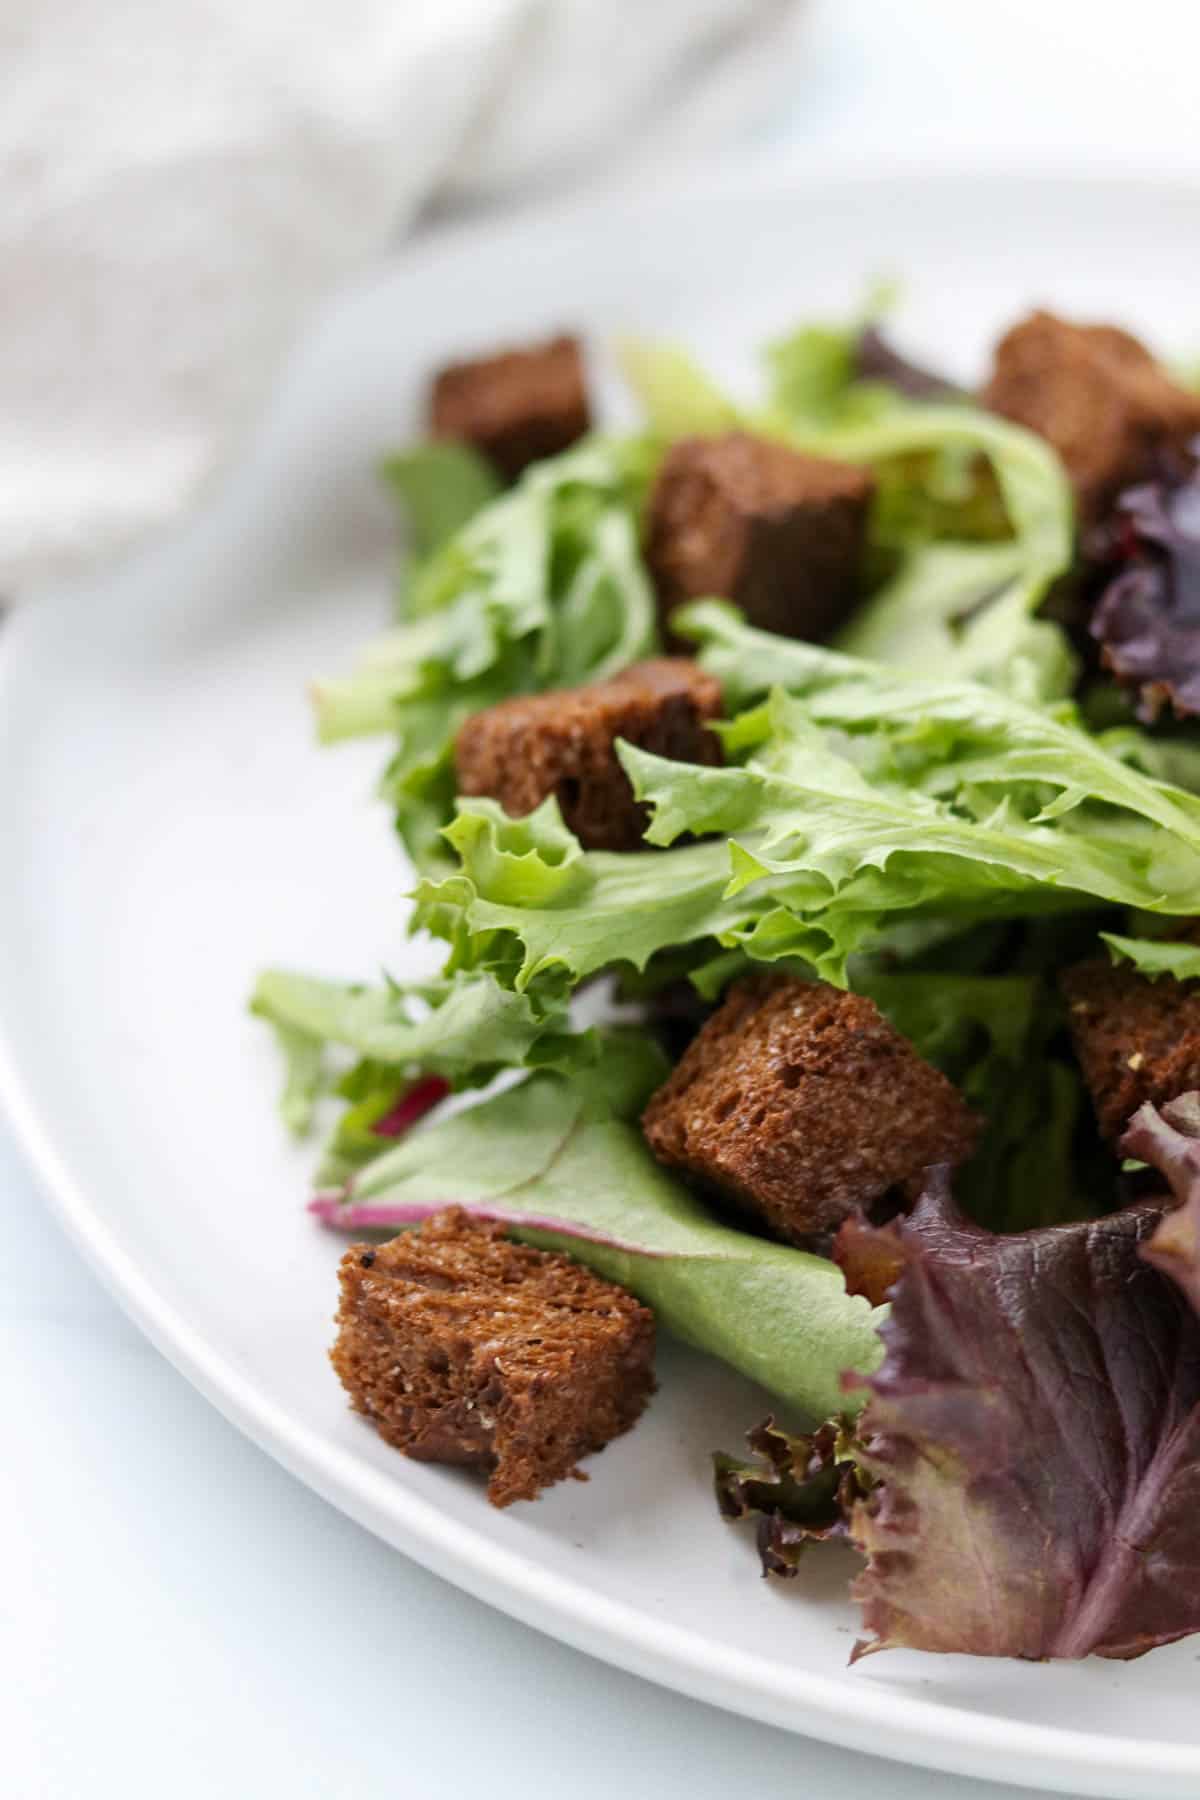 Rye croutons and lettuce on a white plate.